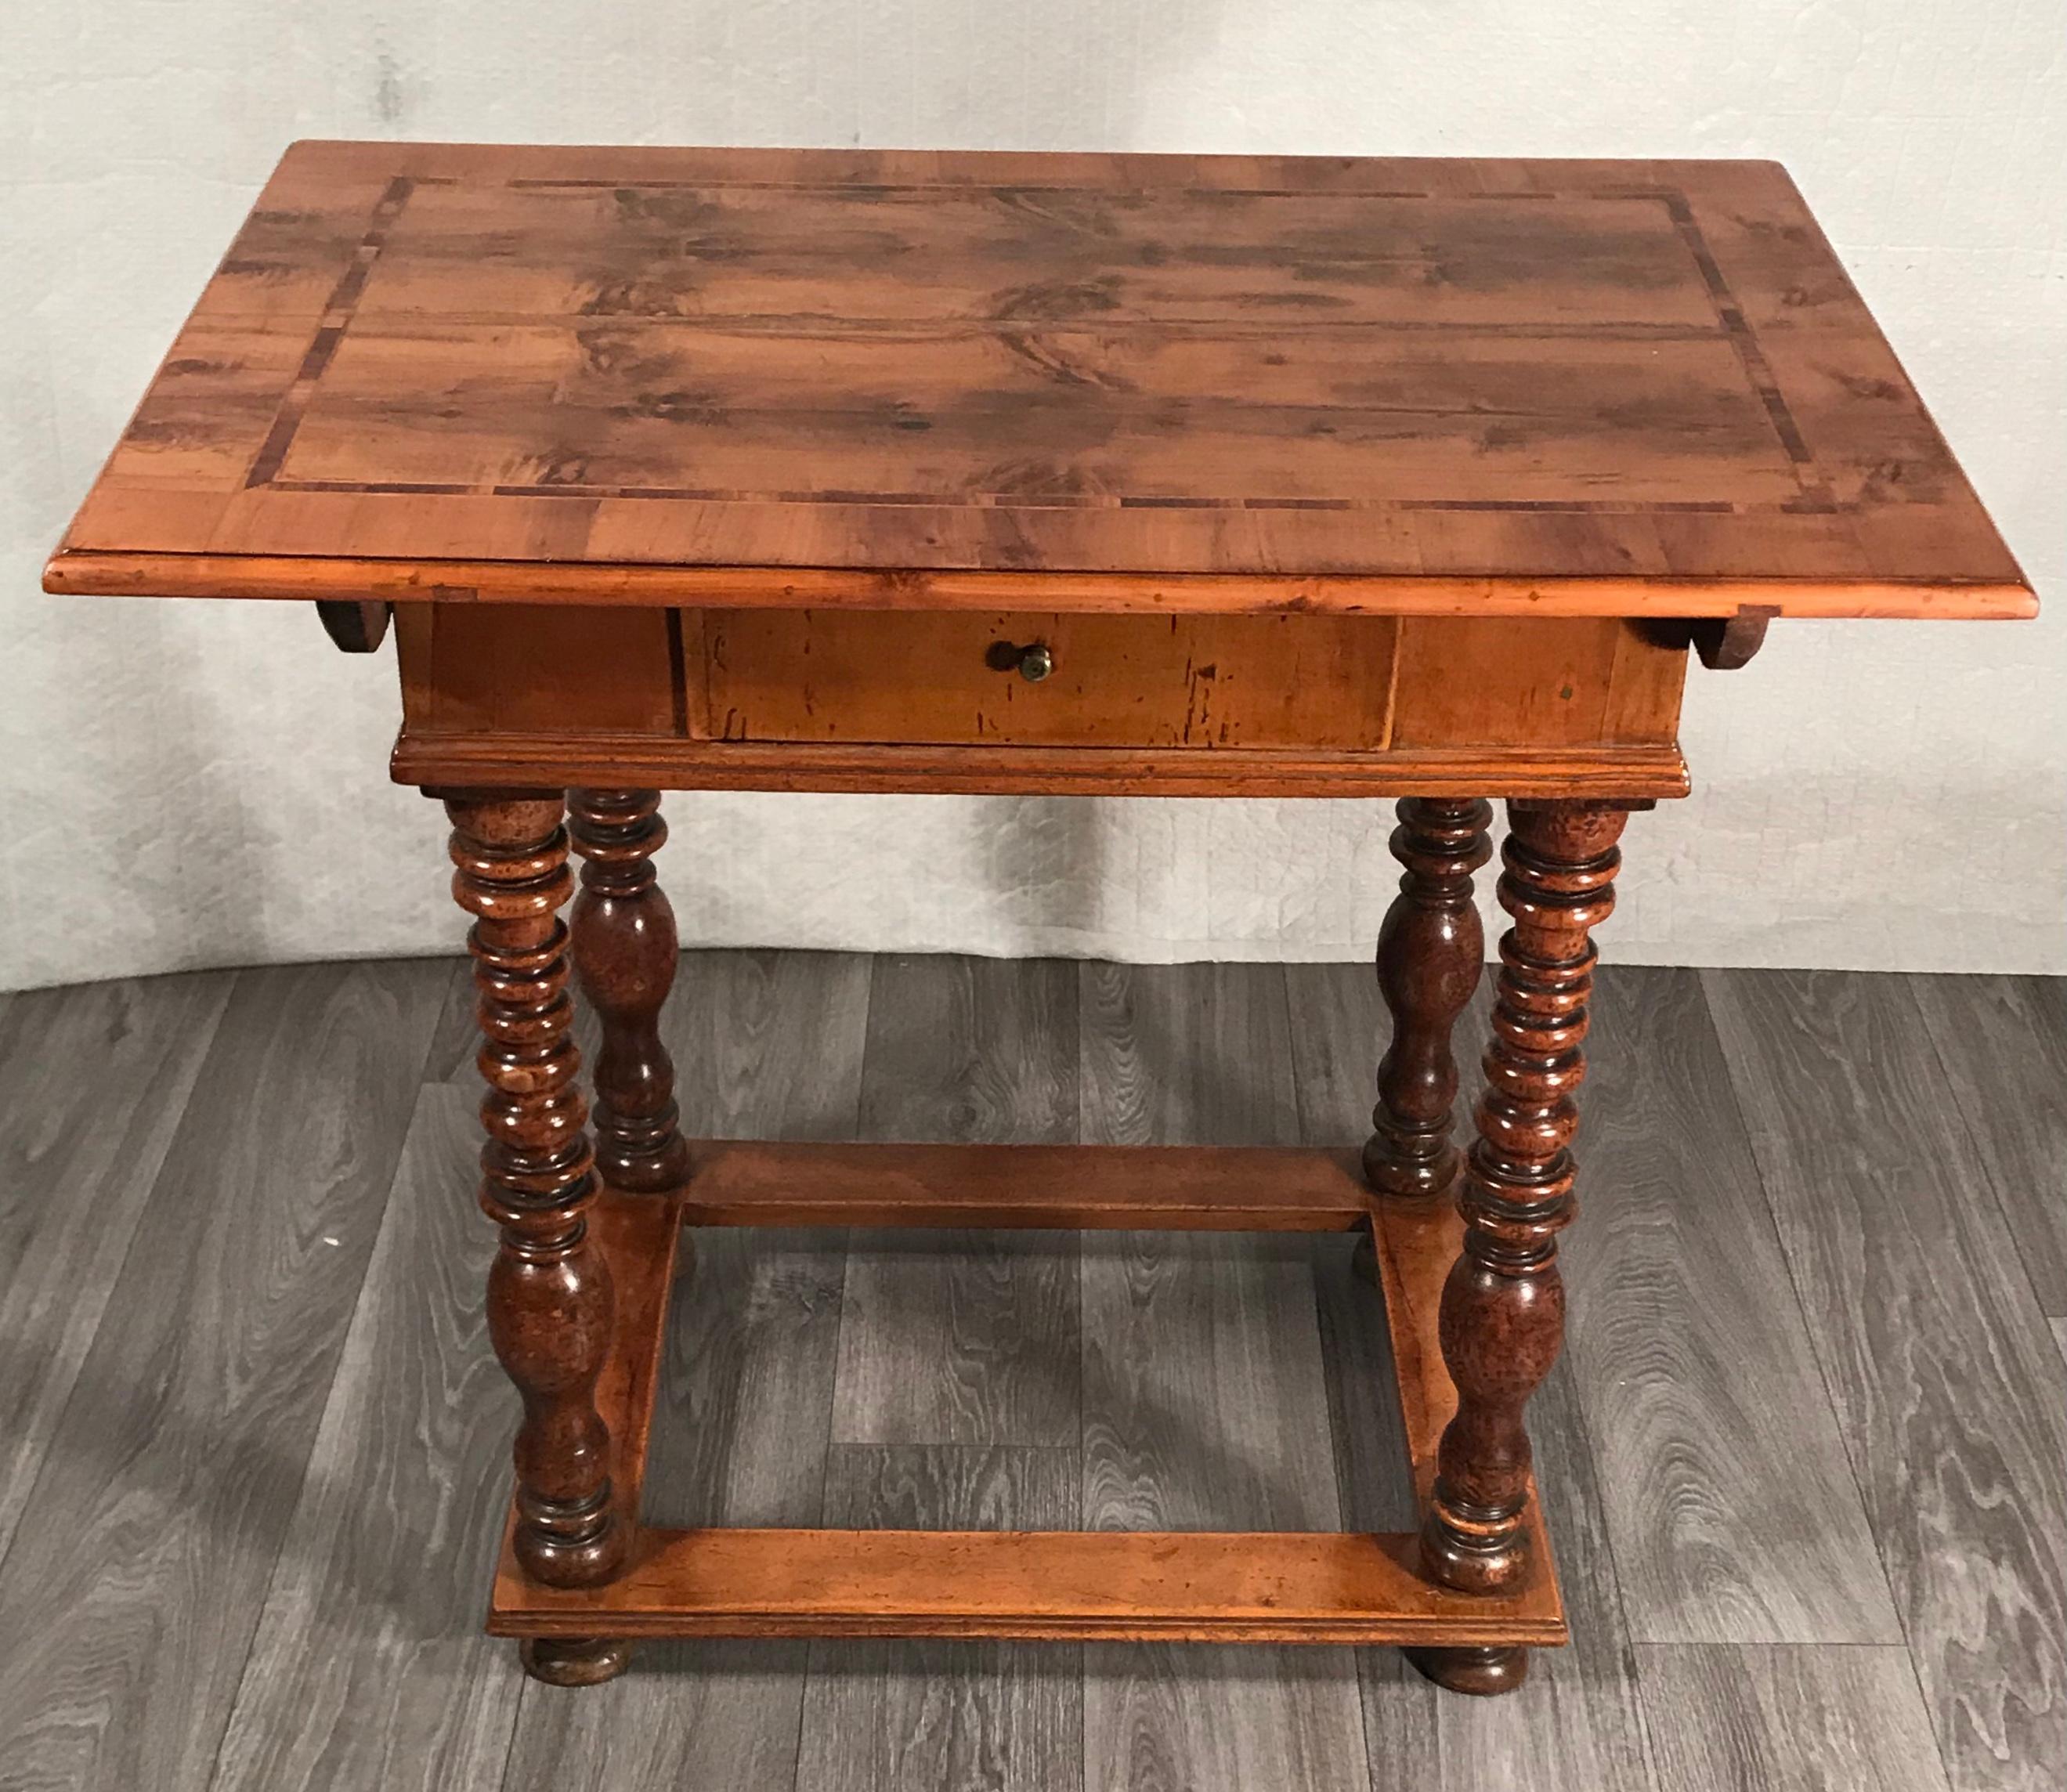 Baroque table, Southern Germany, 1750. This original 18th century table comes probably from the city of Augsburg region in Bavaria.
The beautiful rectangular top is raised on its original turned oak wood base. The top itself is decorated with